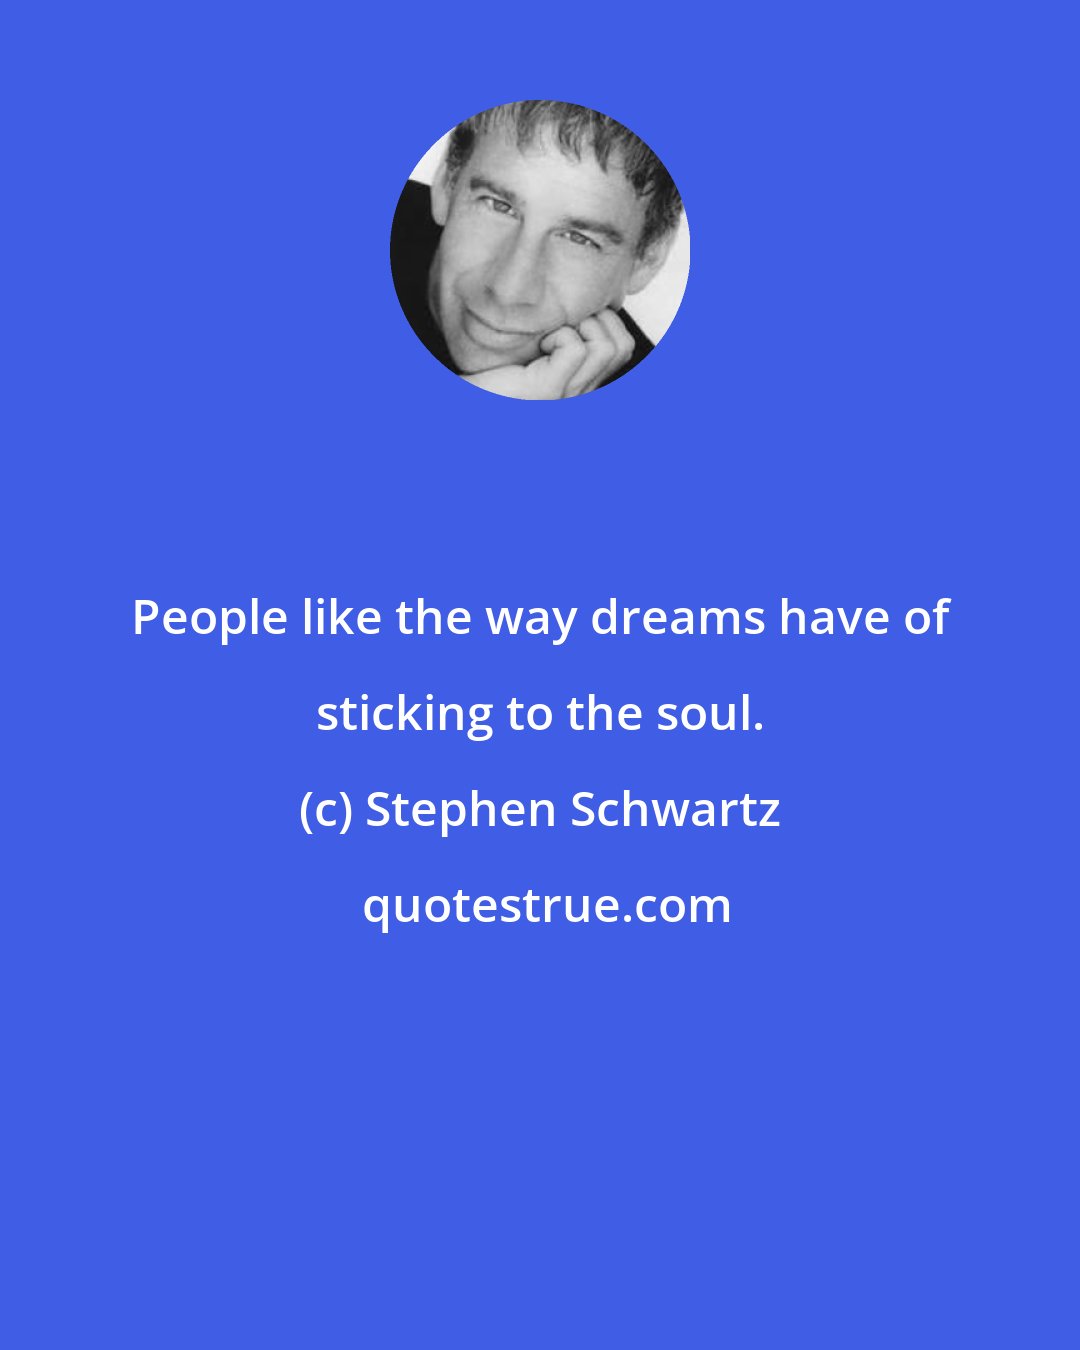 Stephen Schwartz: People like the way dreams have of sticking to the soul.